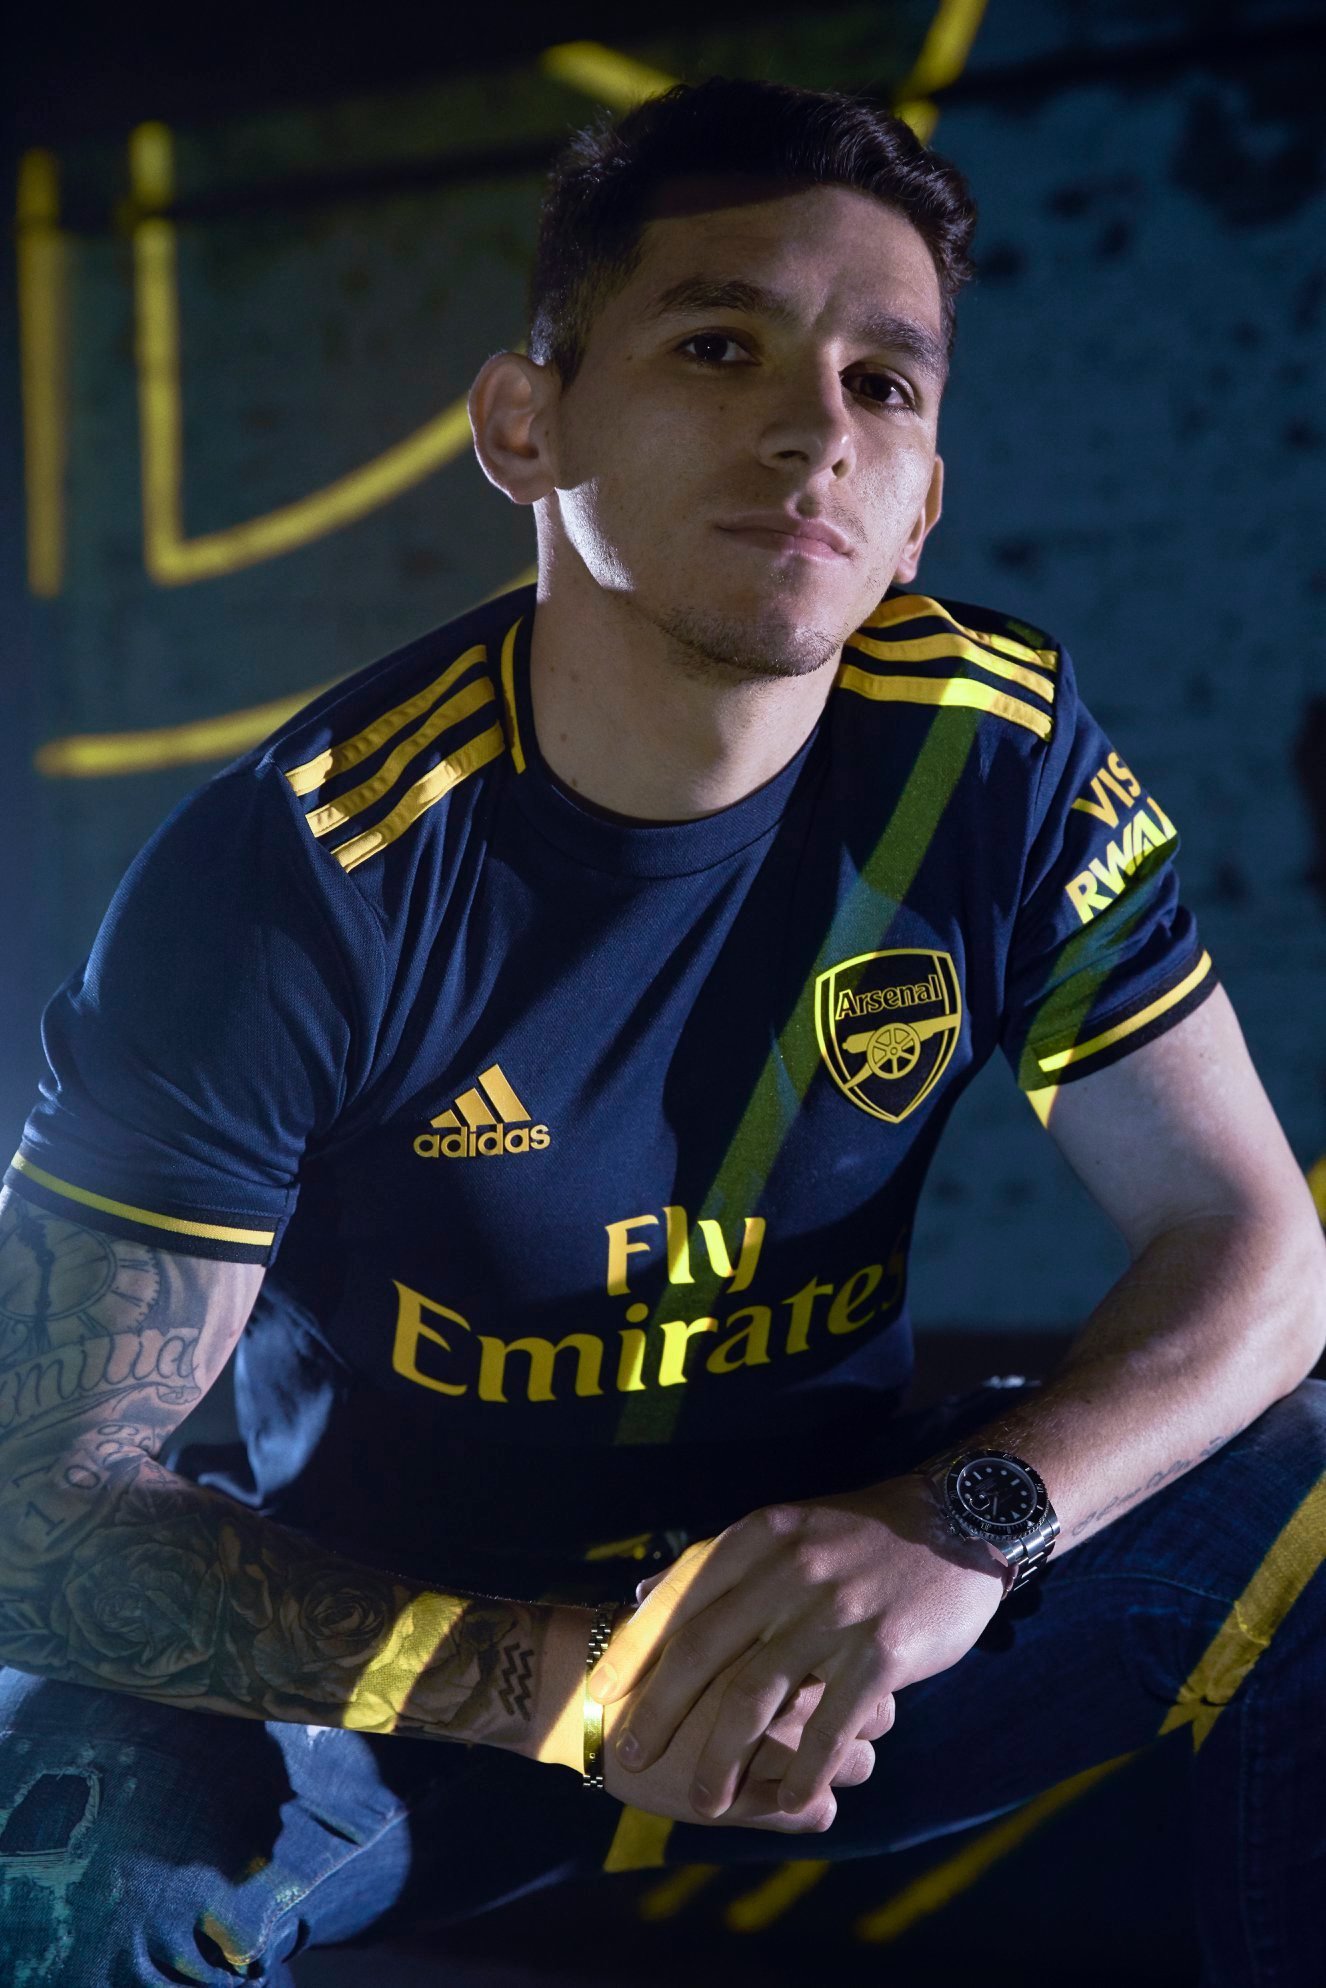 2020/21 adidas kit collection is complete. The third kit is revealed